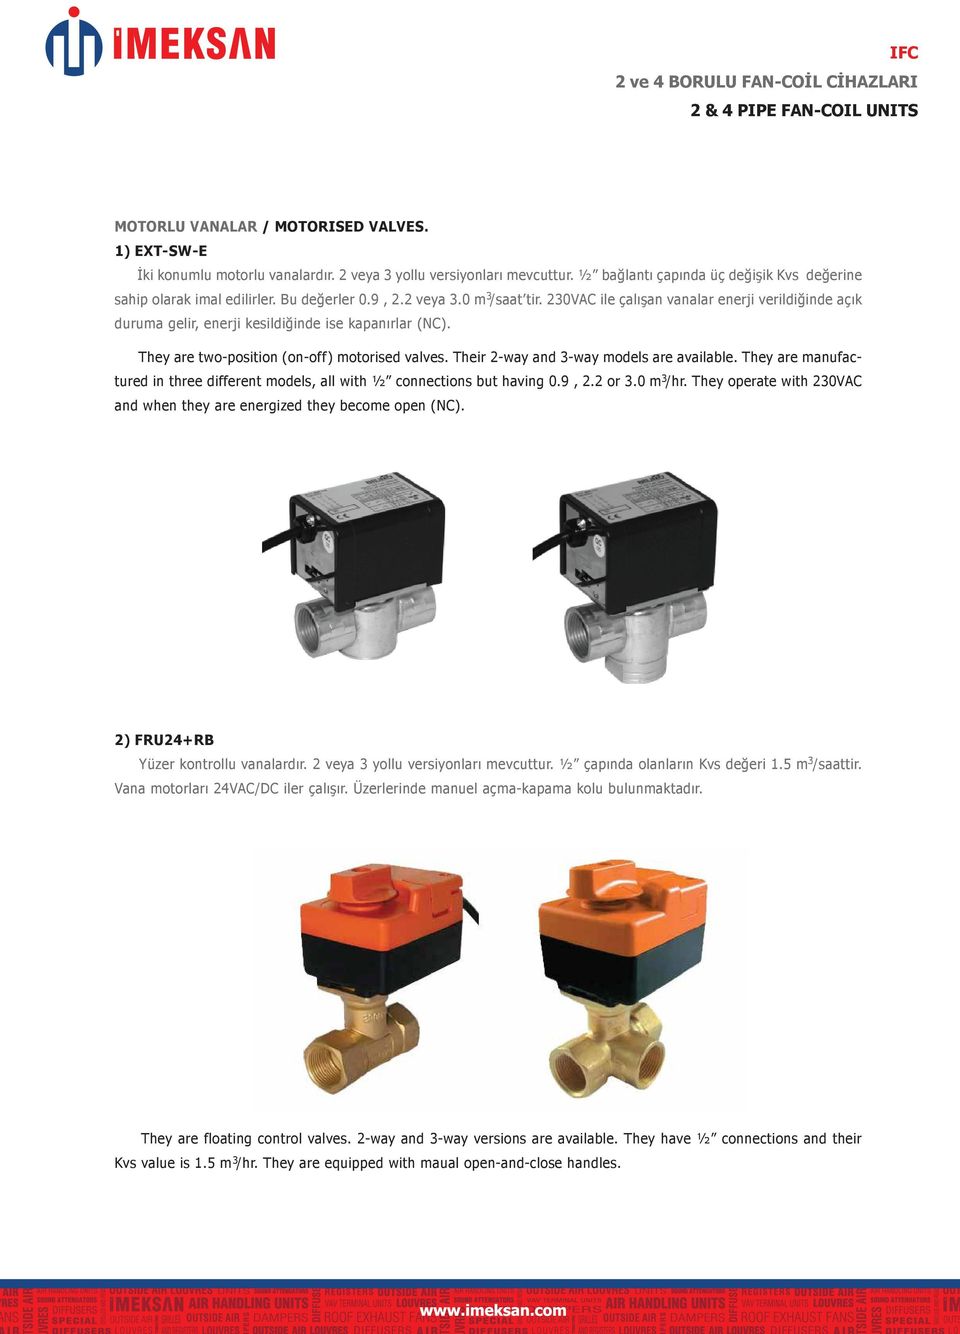 Their 2-way and 3-way models are available. They are manufactured in three different models, all with ½ connections but having.9, 2.2 or 3. m 3/hr.